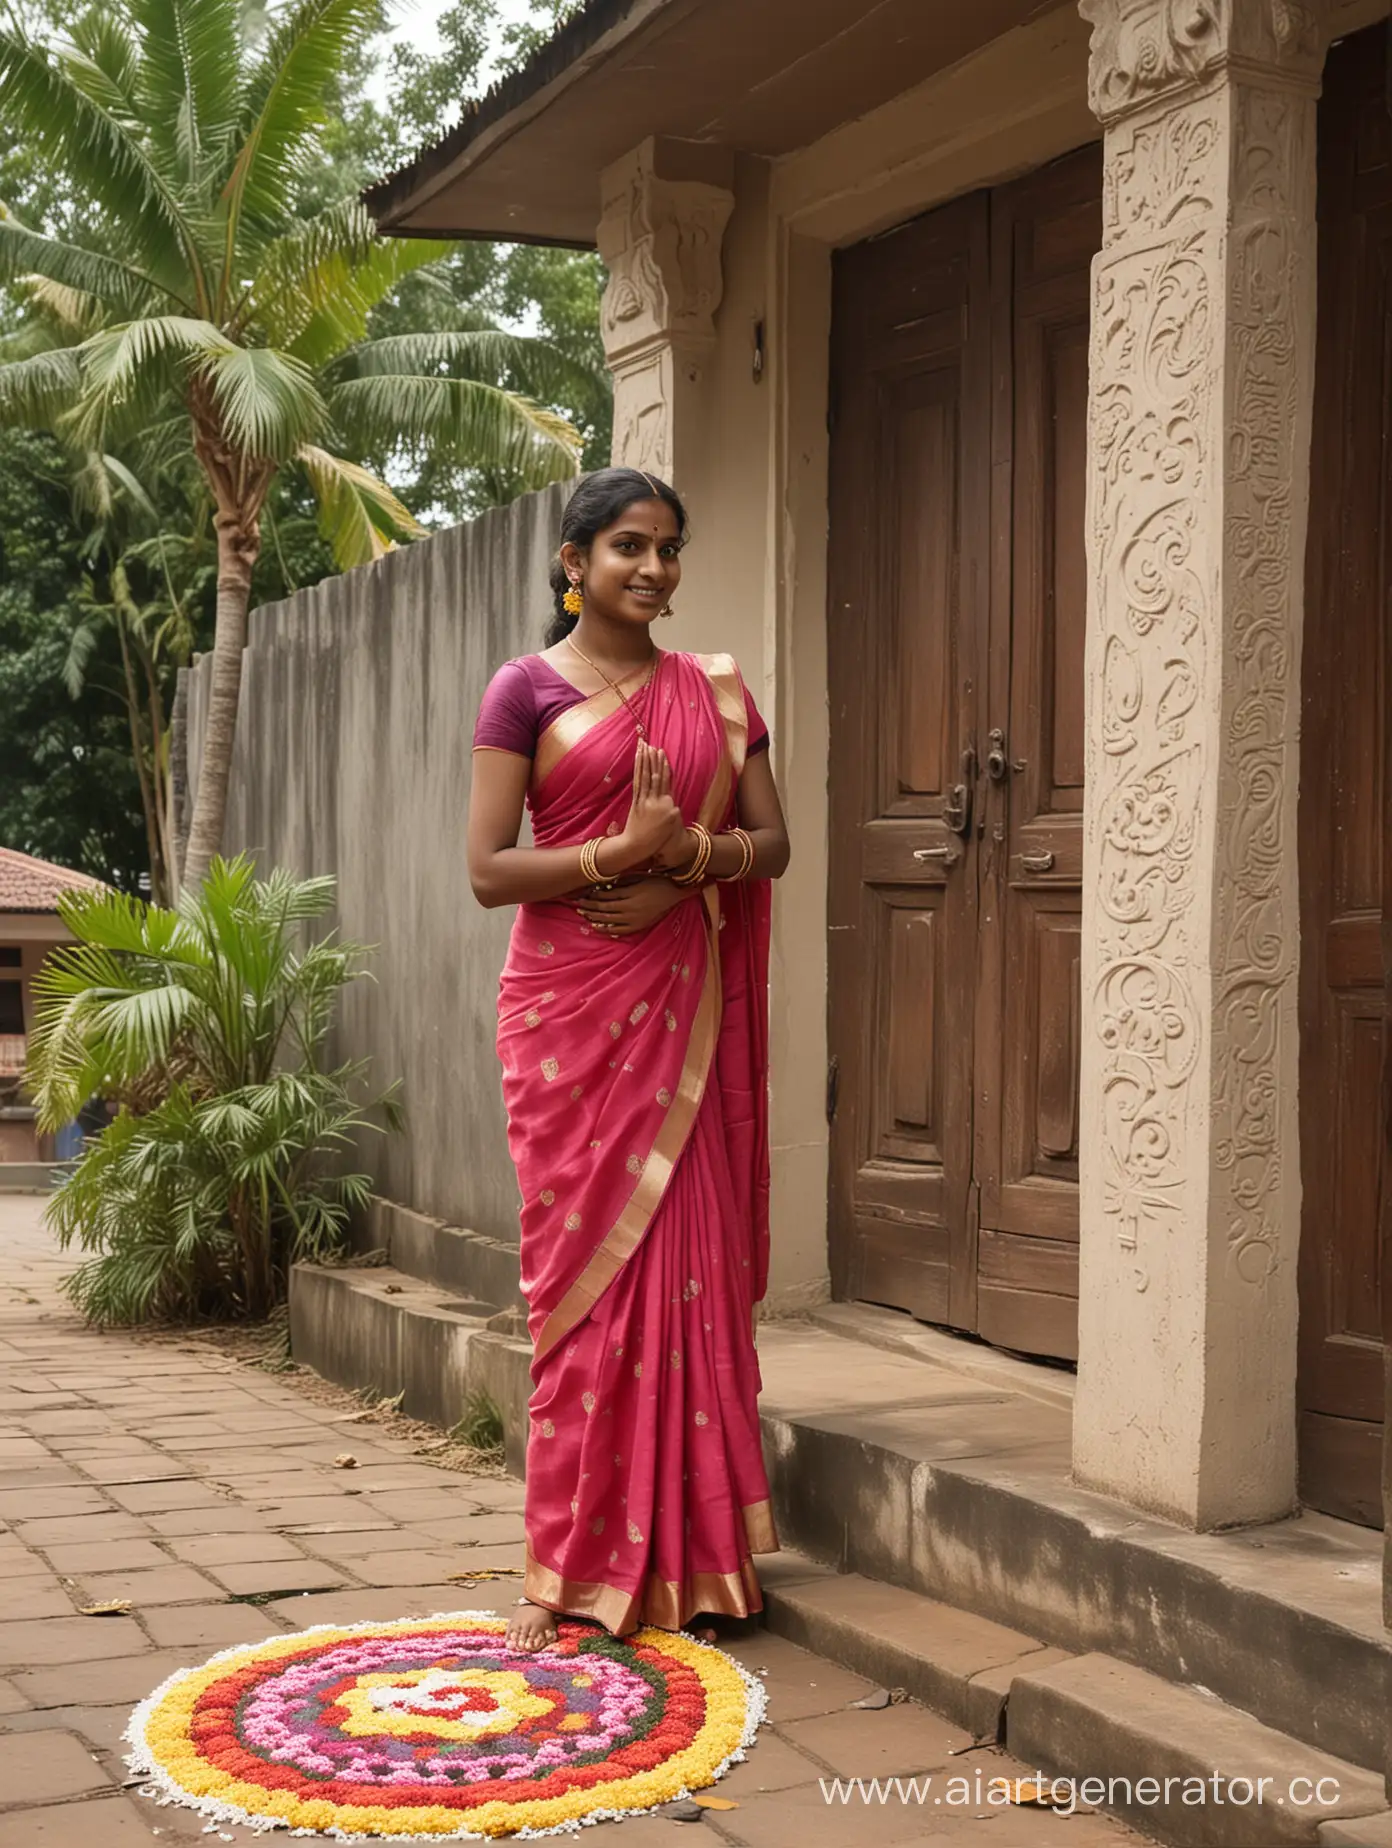 A beautiful dusky hot Tamil girl in saree putting kollam in front of her house. Her hair is tied in a bun with a towel. It is early dawn and sun is just about to rise. The kollam (rangoli) reads "Happy Tamil New Year" in Tamil language, with designs of Temple and some artistic designs. The background is a street leading up to the gopuram of a temple. The girl is in crouched position as she is making the kollam. The kollam reads 
இனிய தமிழ் புத்தாண்டு வாழ்த்துக்கள்